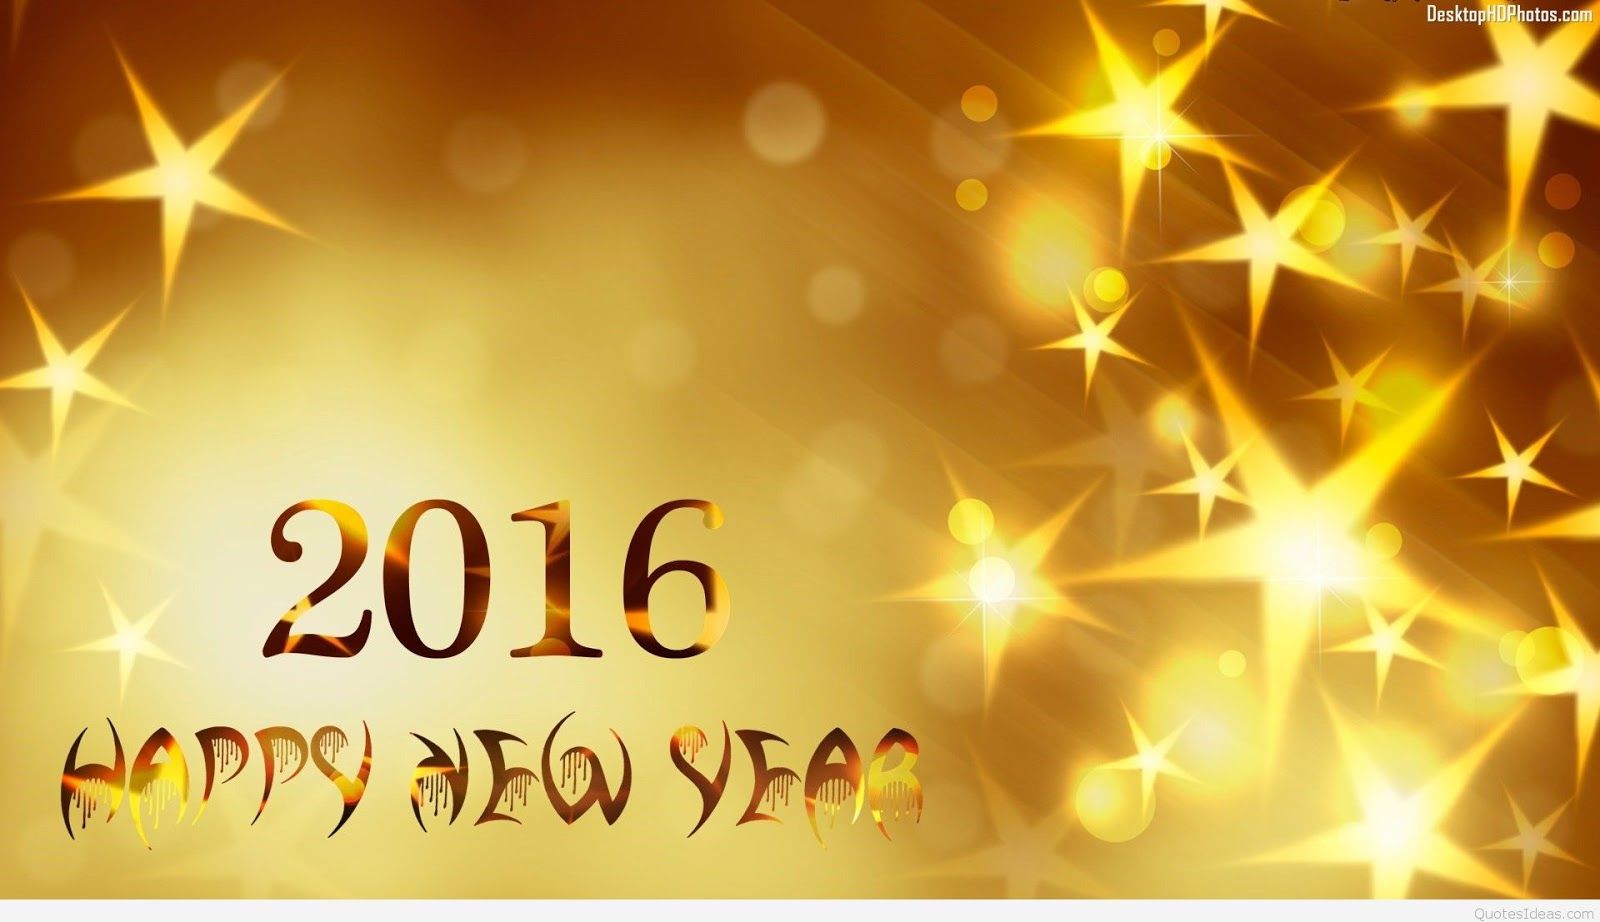 2016 Happy New Years Wallpaper Pictures Photos and Images for 1600x922